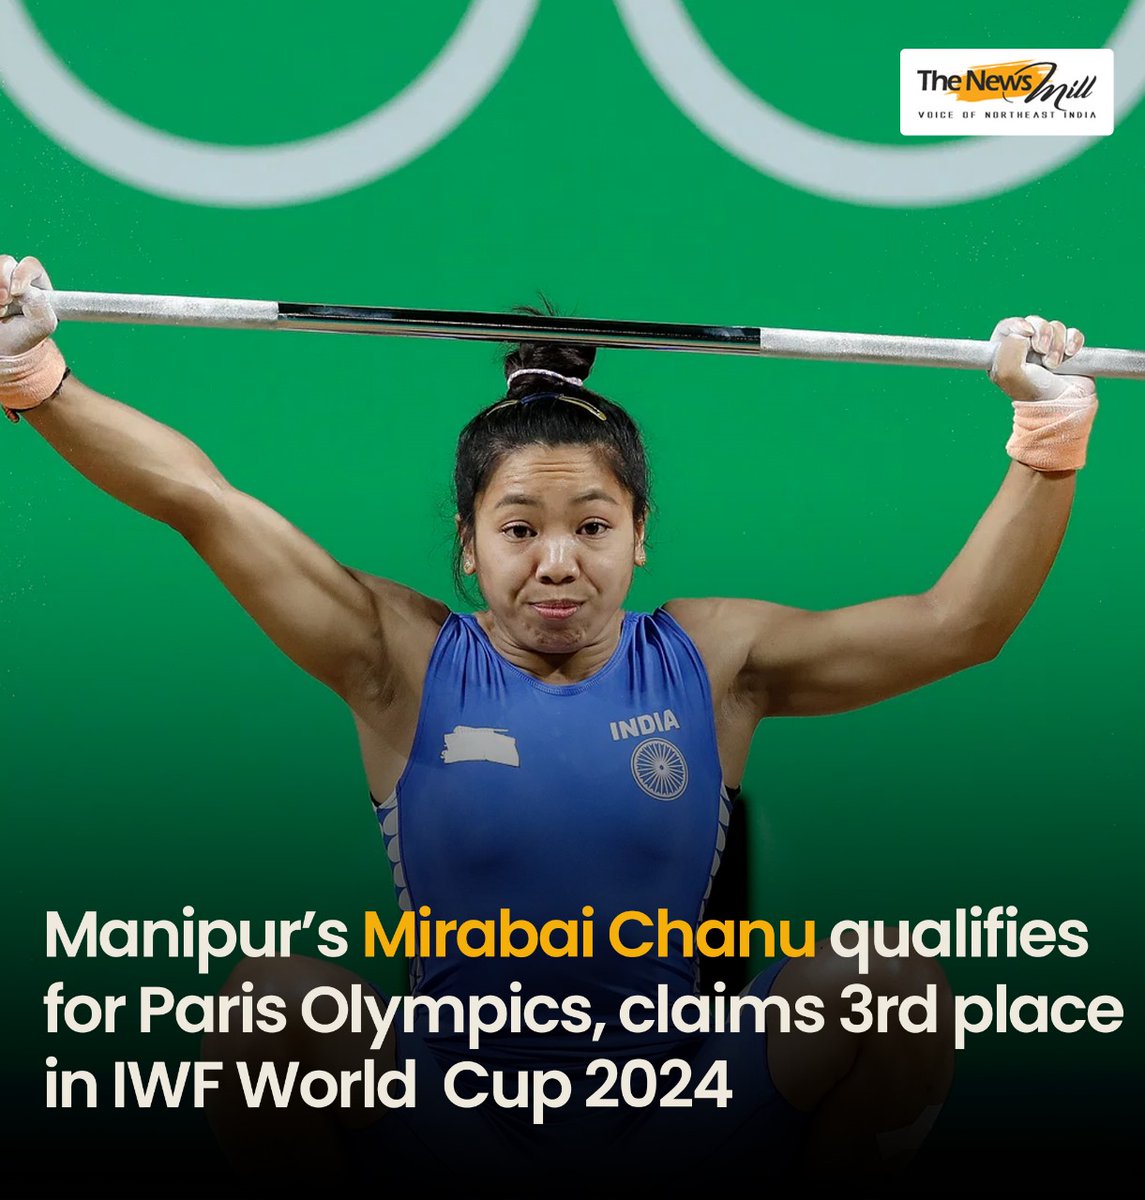 Tokyo Olympics silver-medallist Mirabai Chanu assured her qualification for the 2024 Paris Olympics after finishing third in group B of the women's 49kg event at the IWF World Cup. The official confirmation will be announced after the conclusion of the world cup. #Manipur